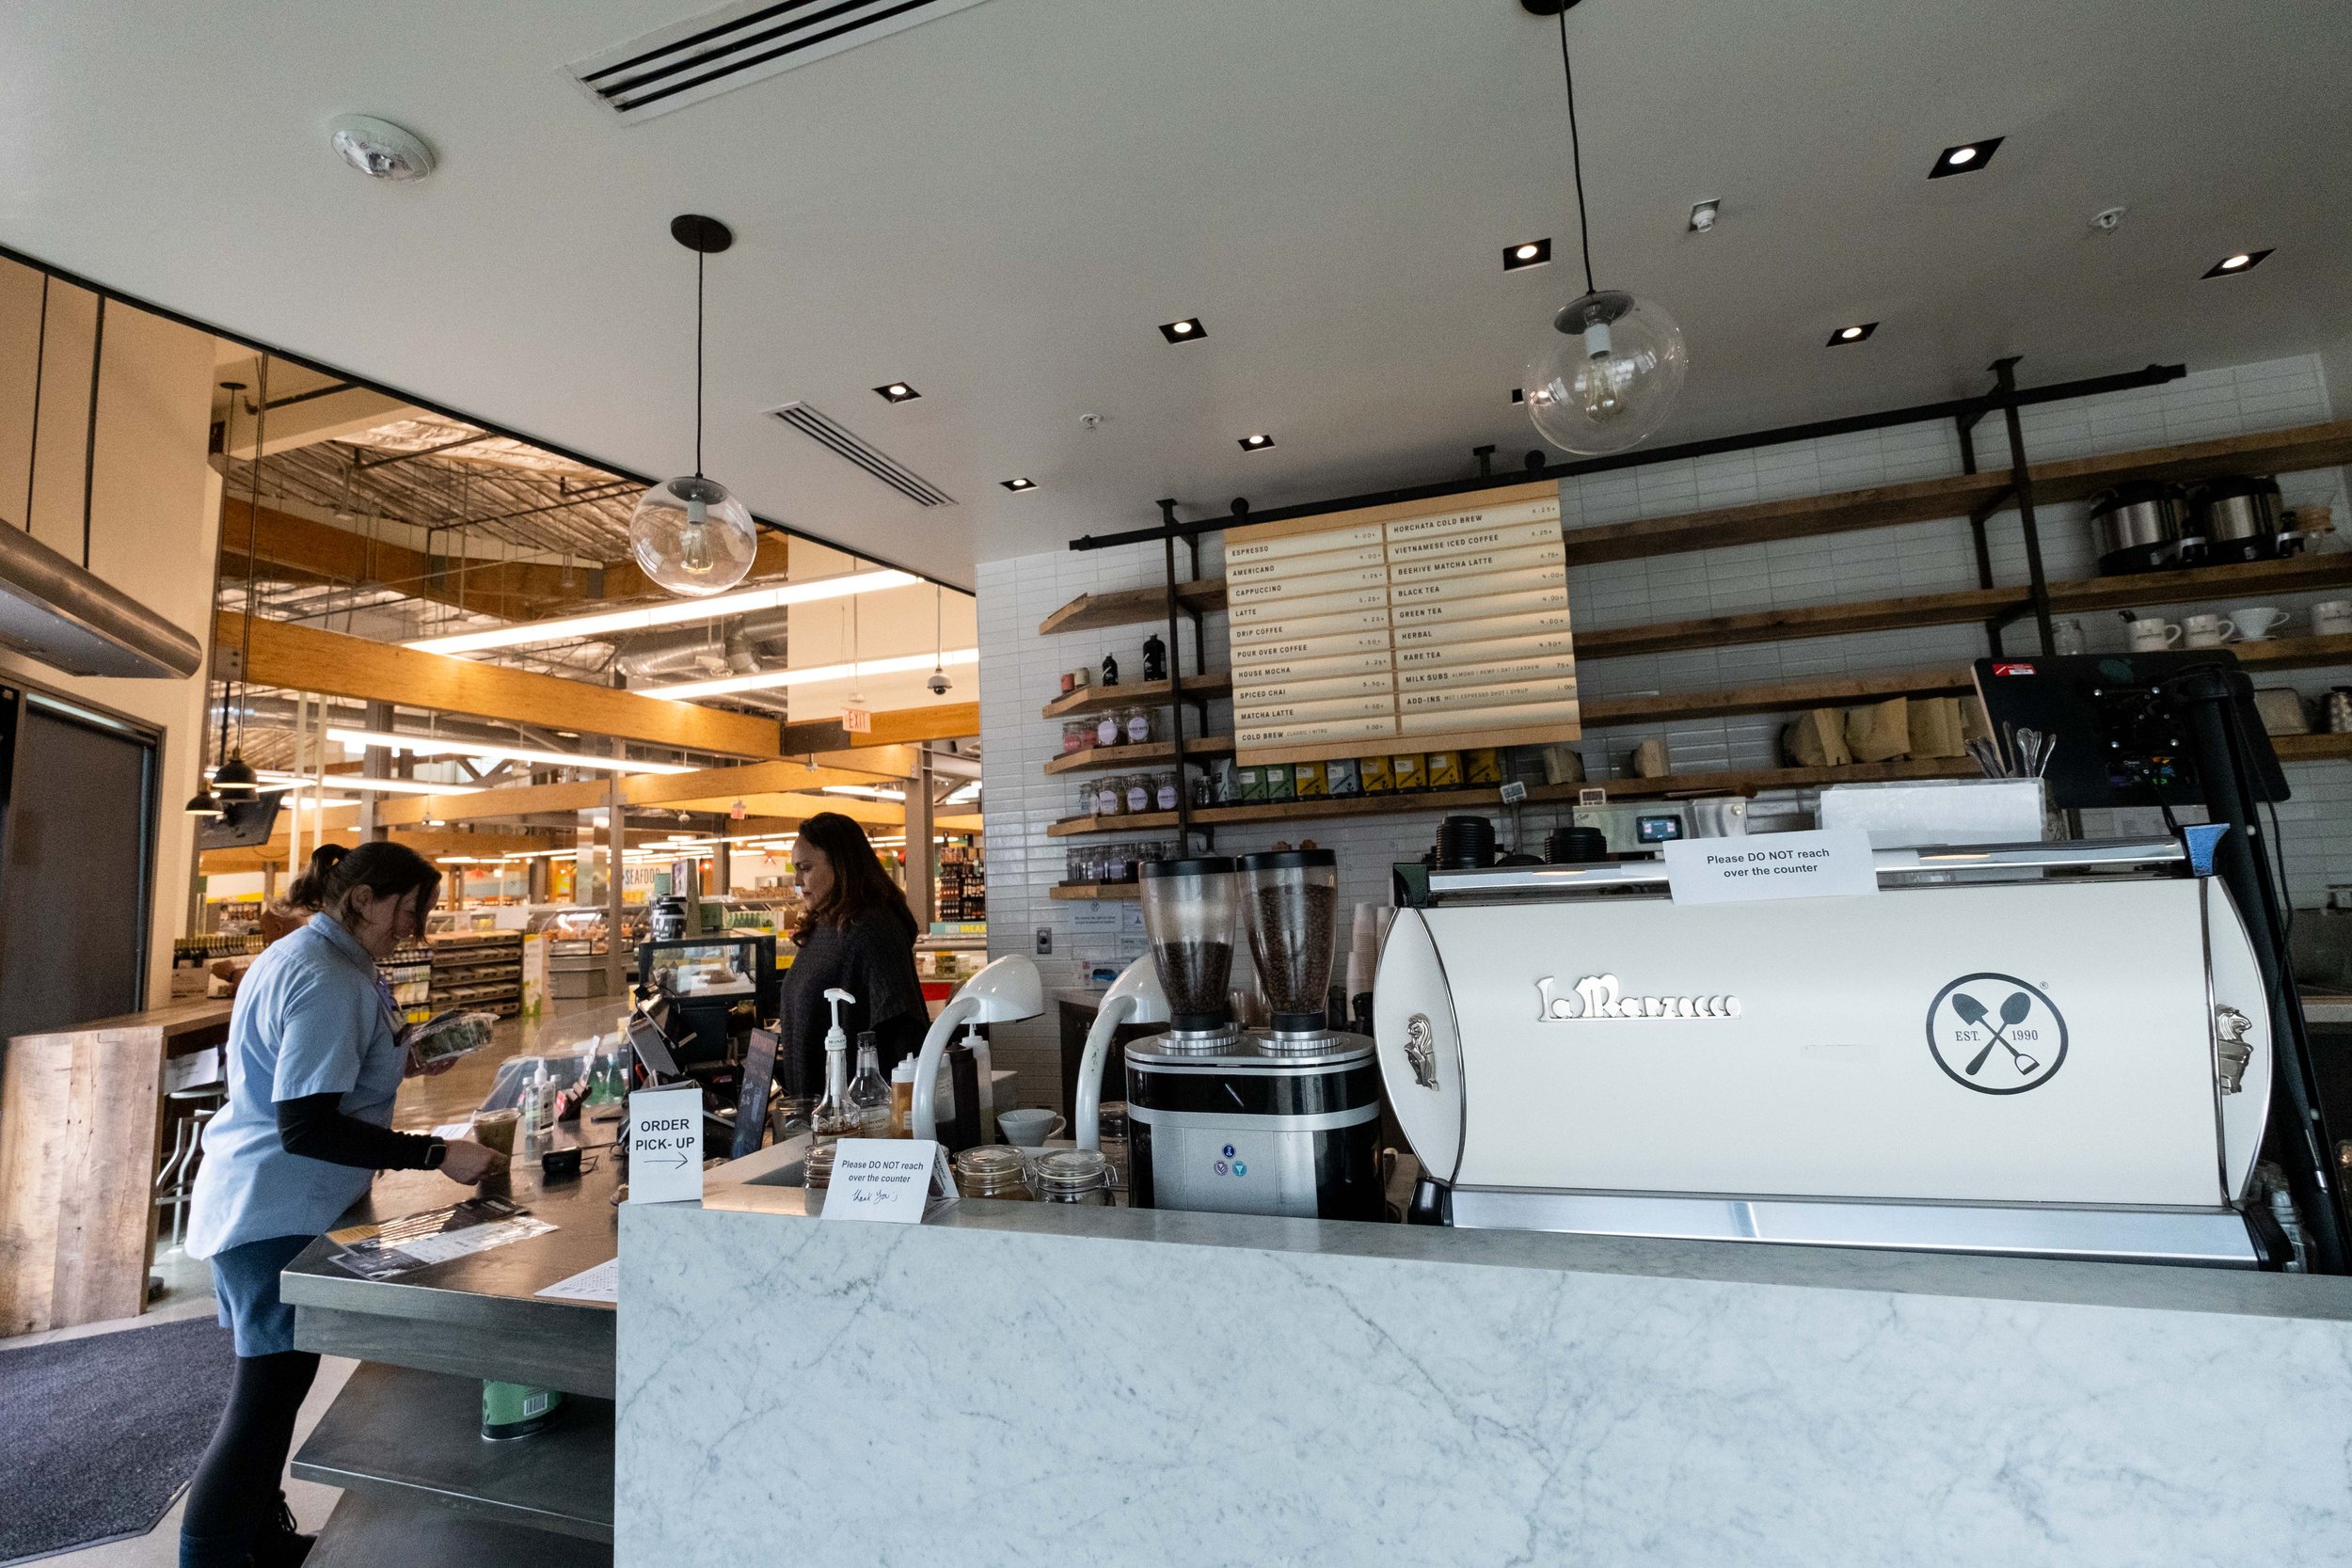  Groundwork Coffee, located at Cloverfield and Pico in Santa Monica, Calif., serves up caffeinated beverages and offers outdoor seating. There is a small selection of pastries, however there is a Whole Foods next door. It's open 7:00am to 3:00pm seve